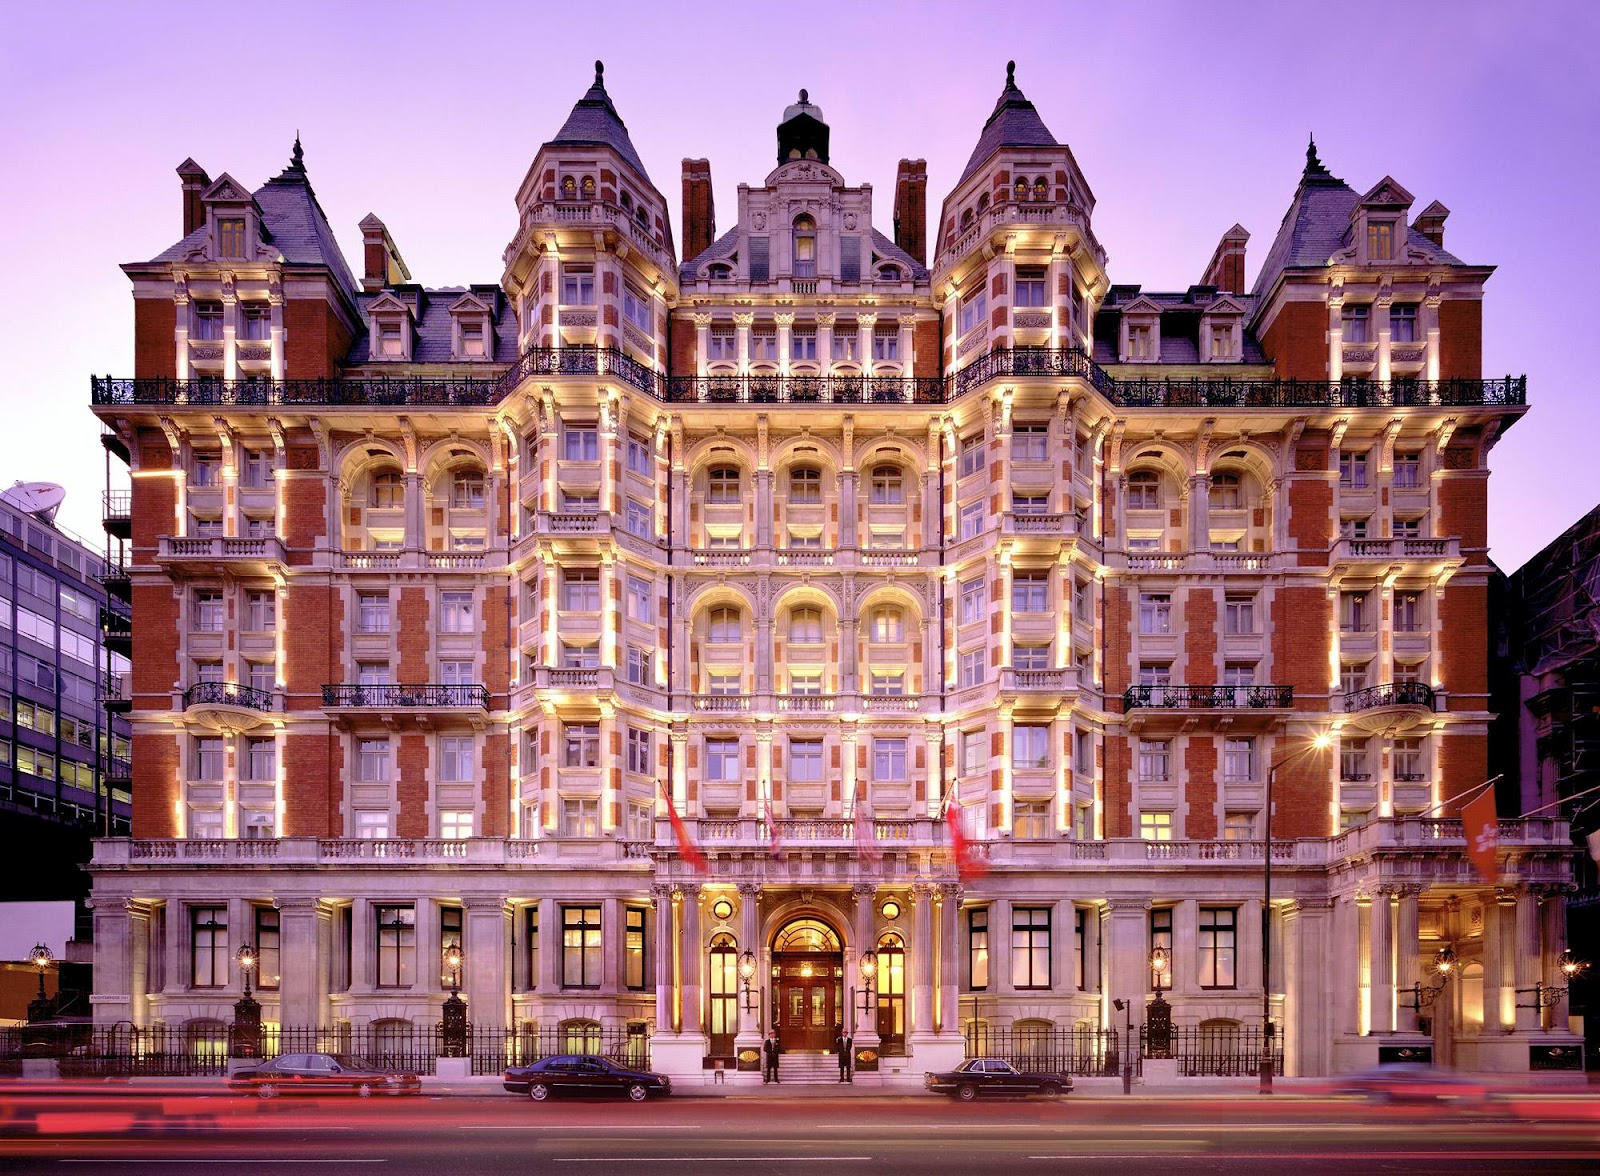 Lomar Travelin: Looking for the best places to stay in London?